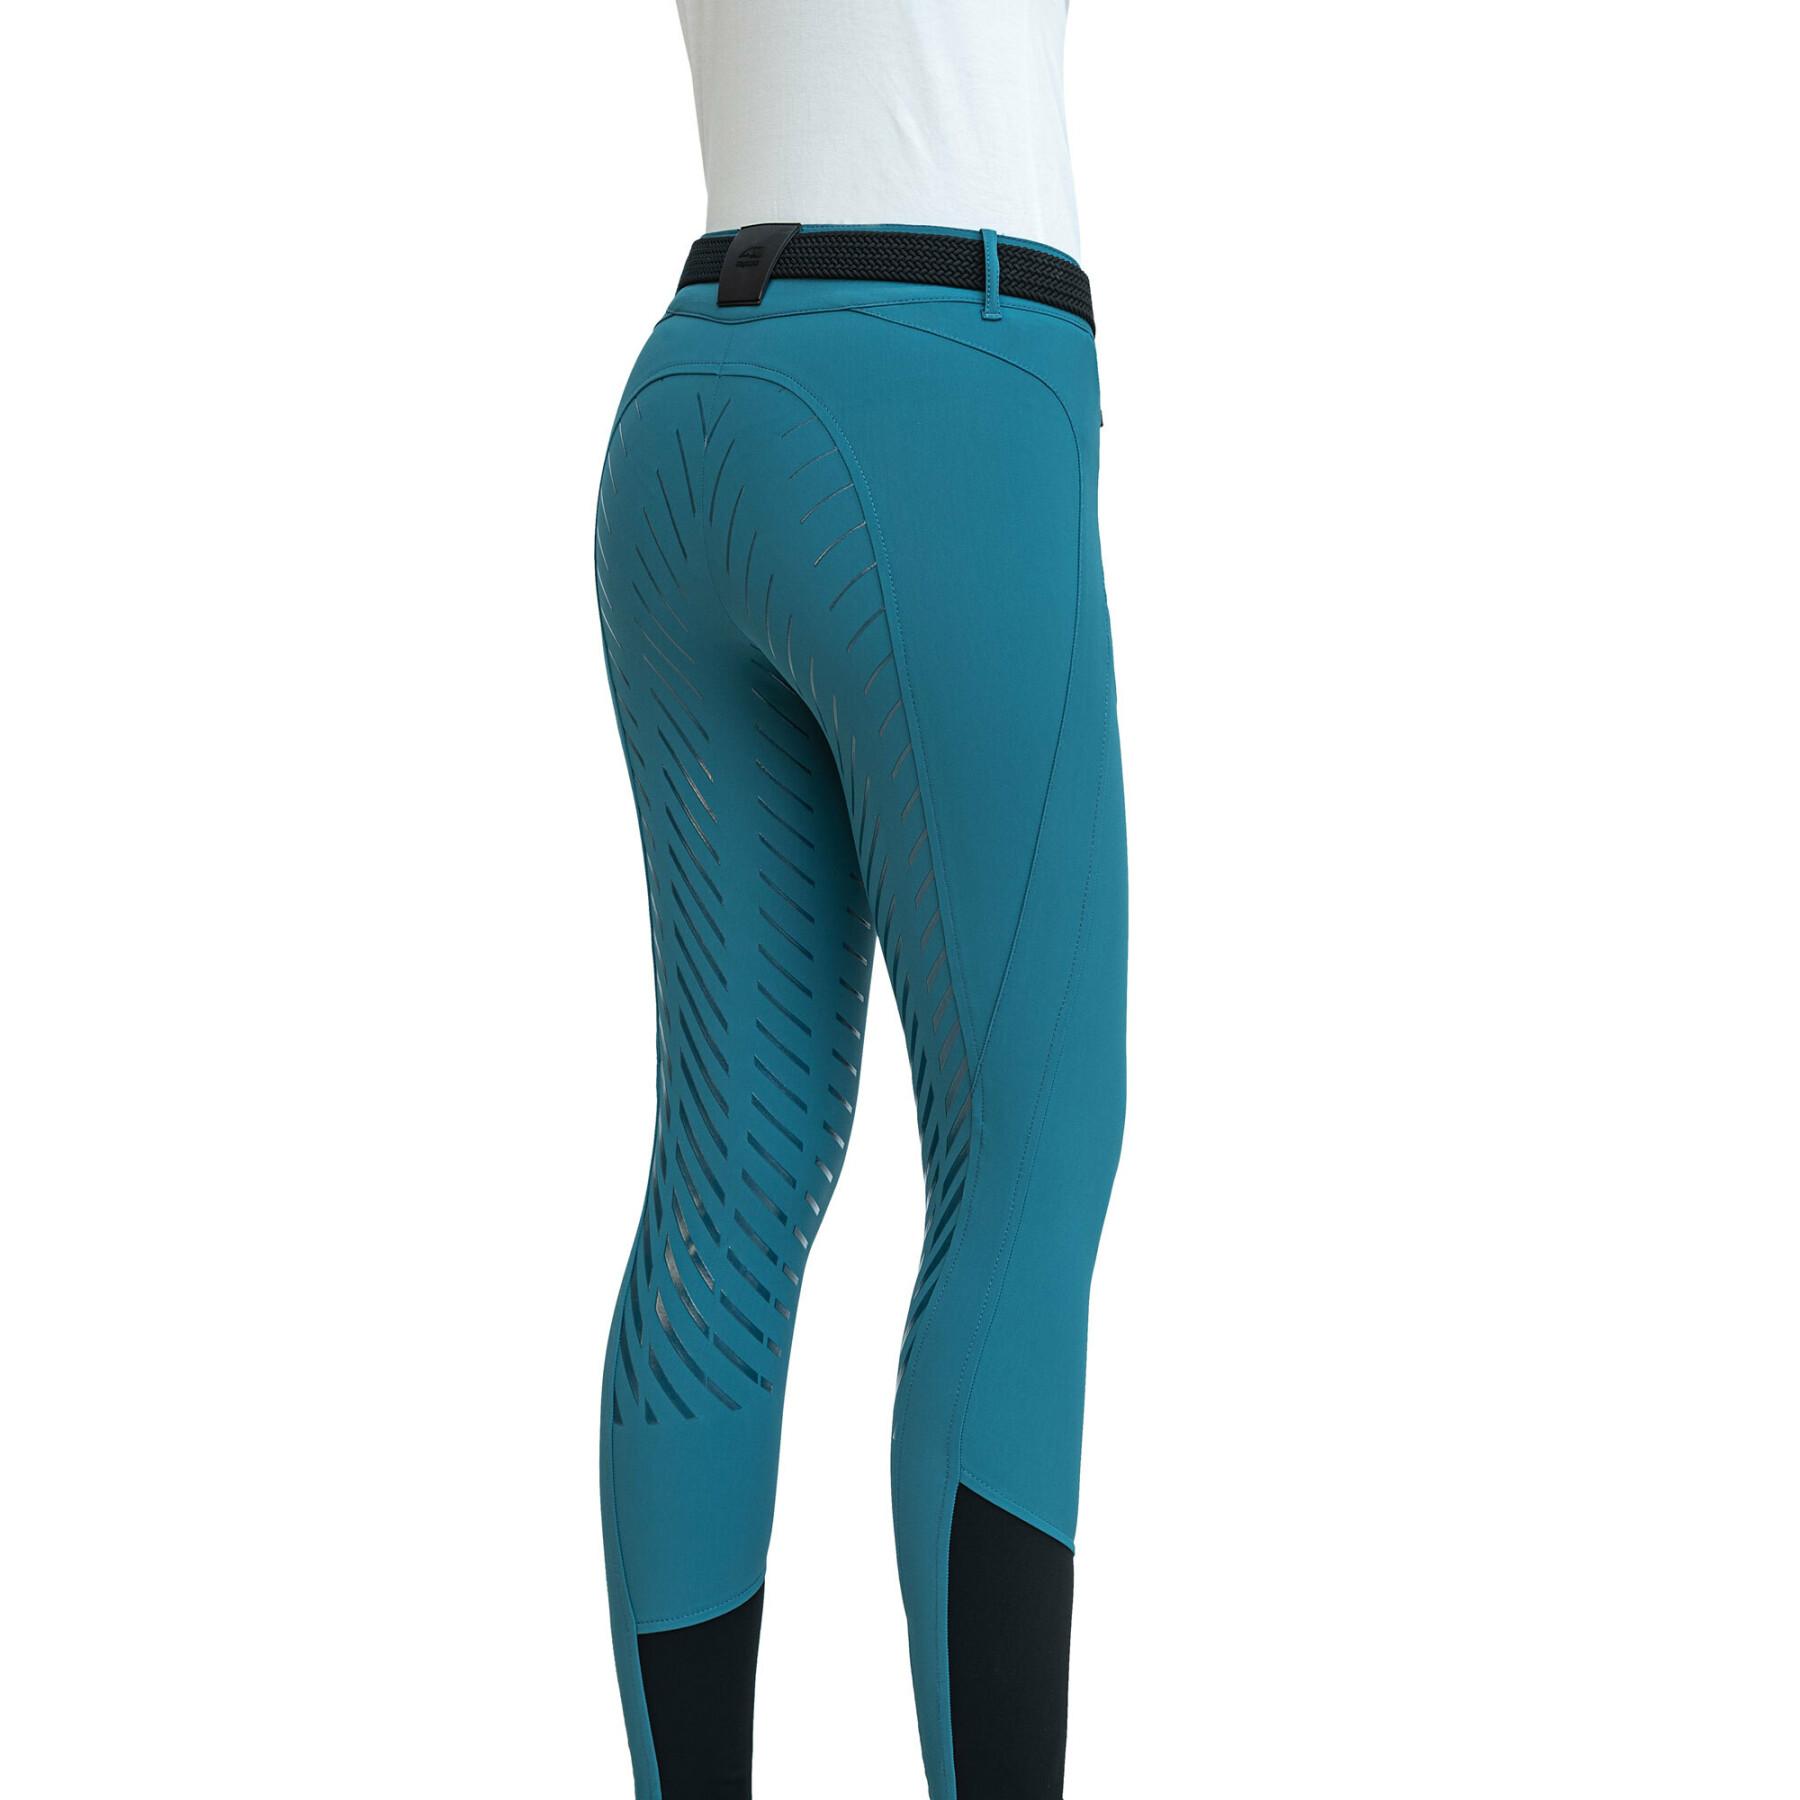 Women's full grip riding pants Equiline B-Move